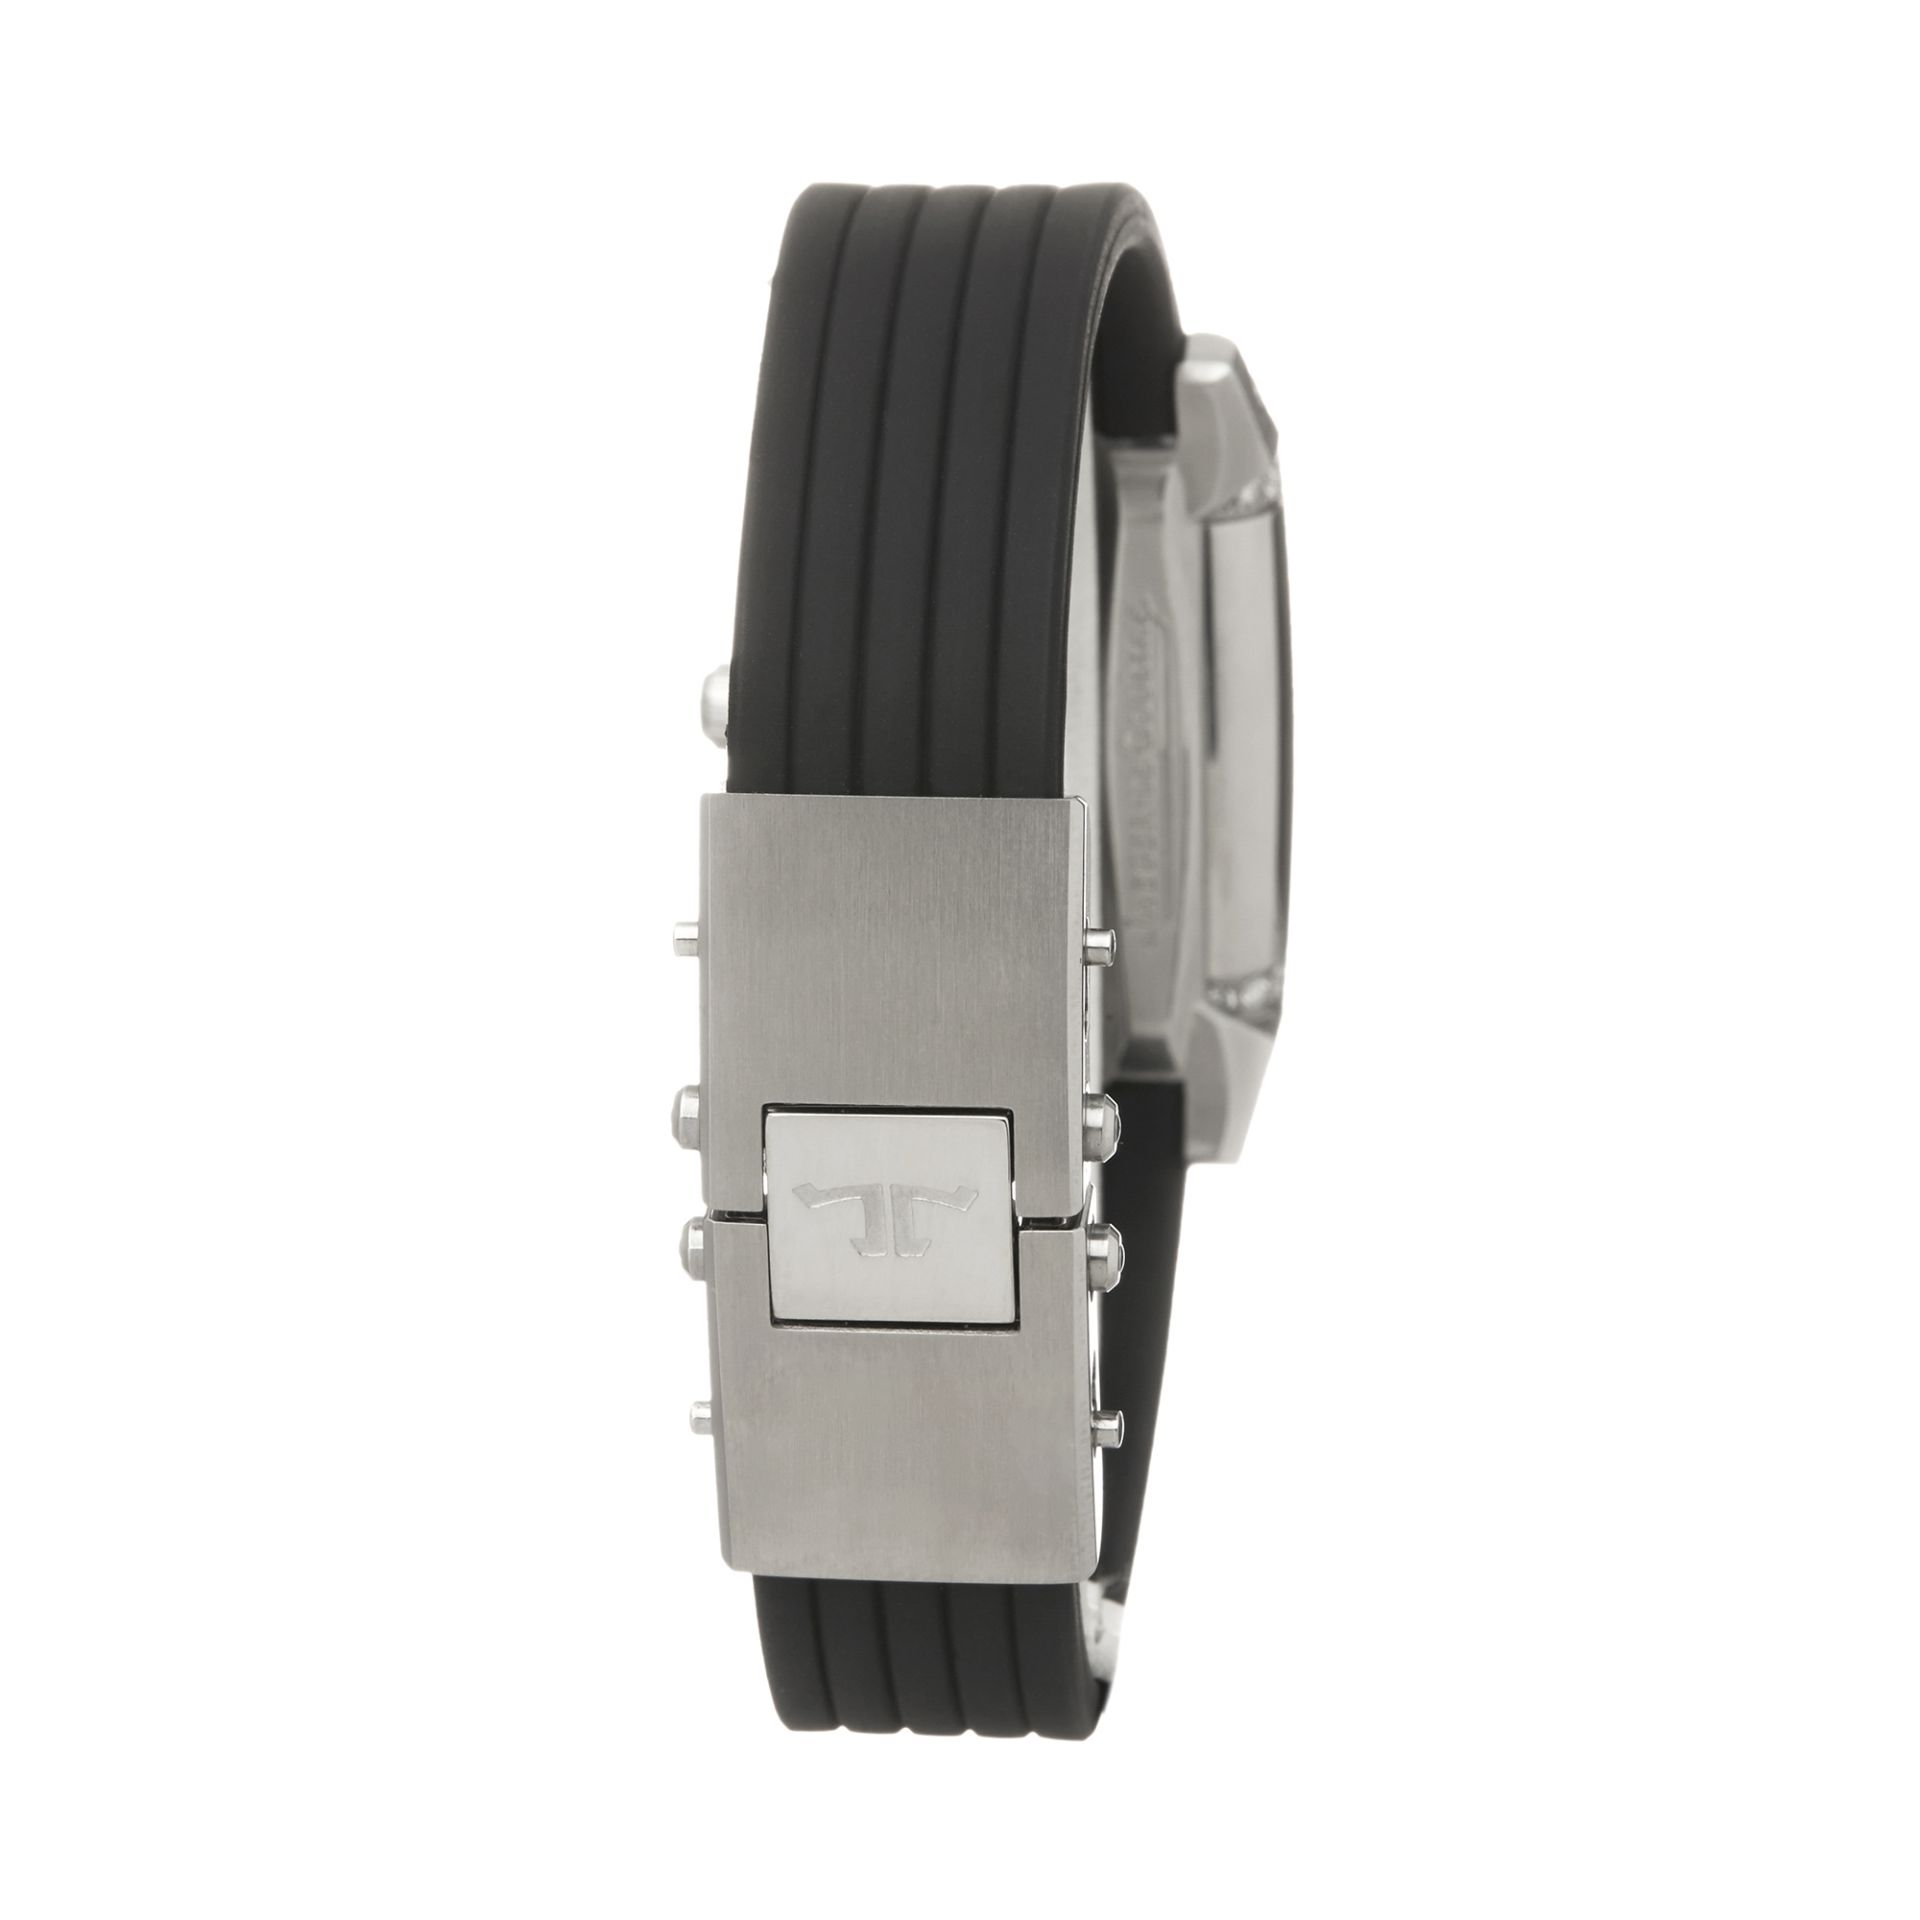 2006 Jaeger-LeCoultre Reverso Stainless Steel - 296.8.74 - Image 4 of 6